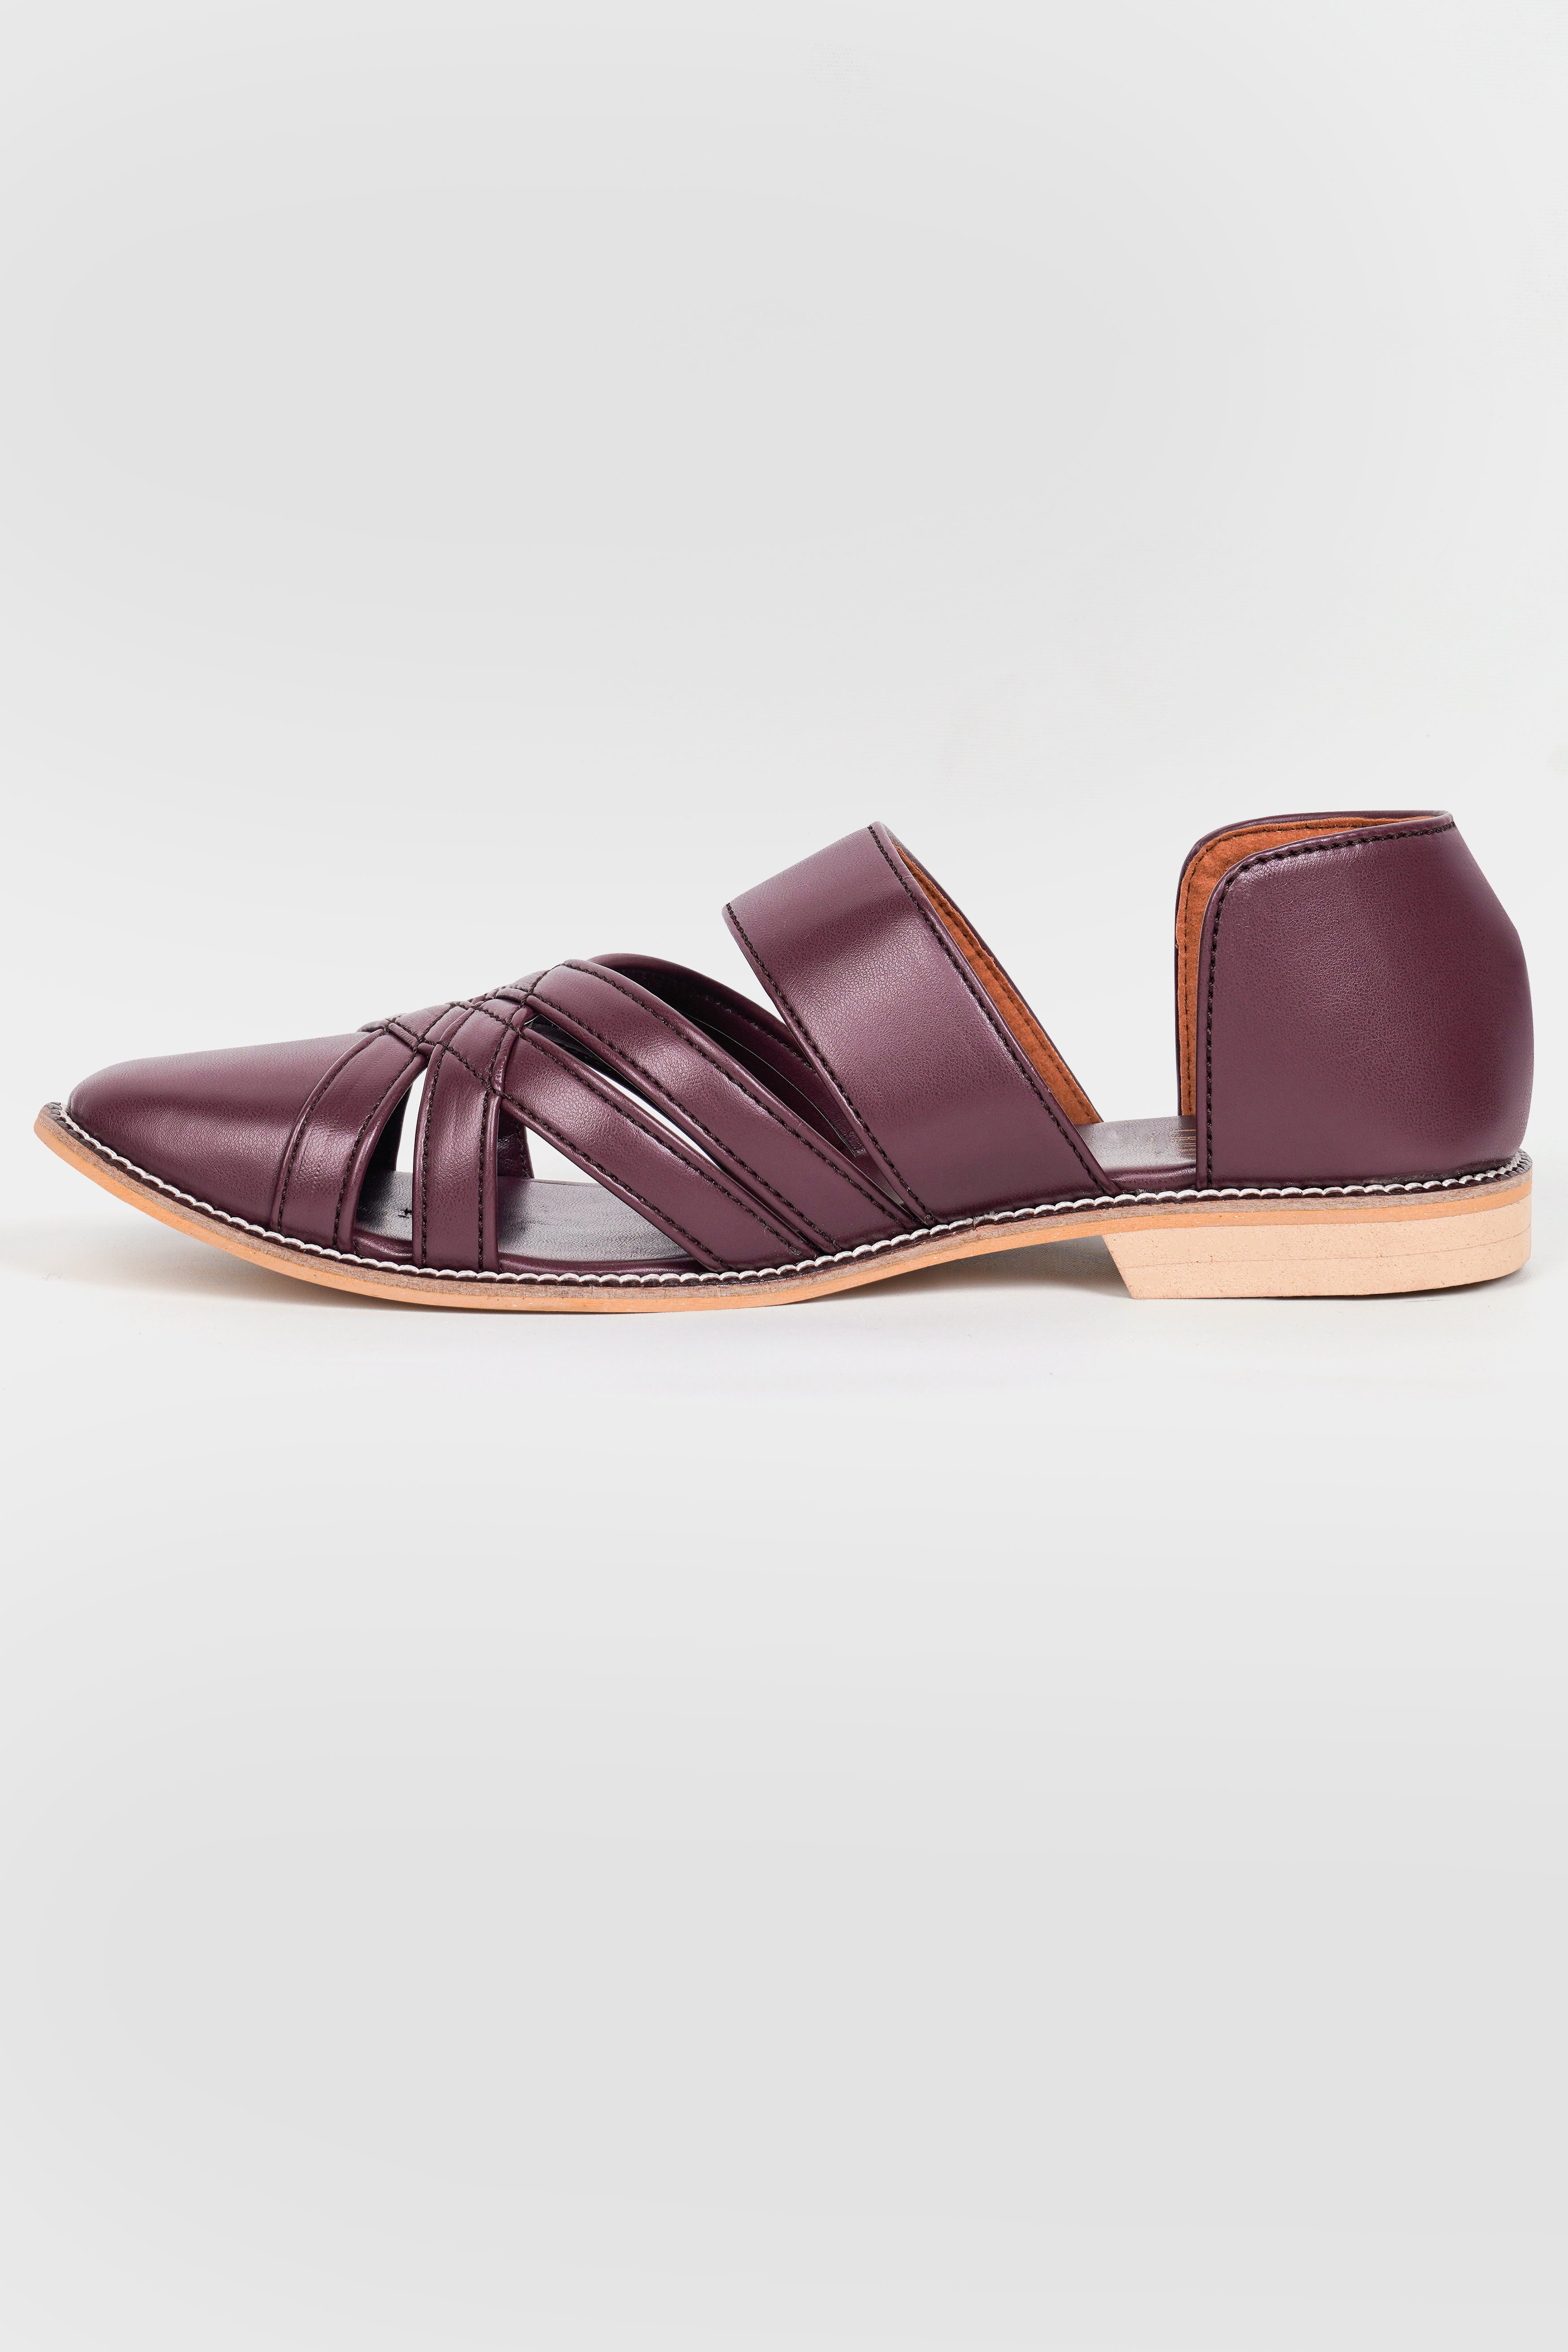 Wine Classic Criss Cross Vegan Leather Hand Stitched Pathanis Sandal FT128-6, FT128-7, FT128-8, FT128-9, FT128-10, FT128-11